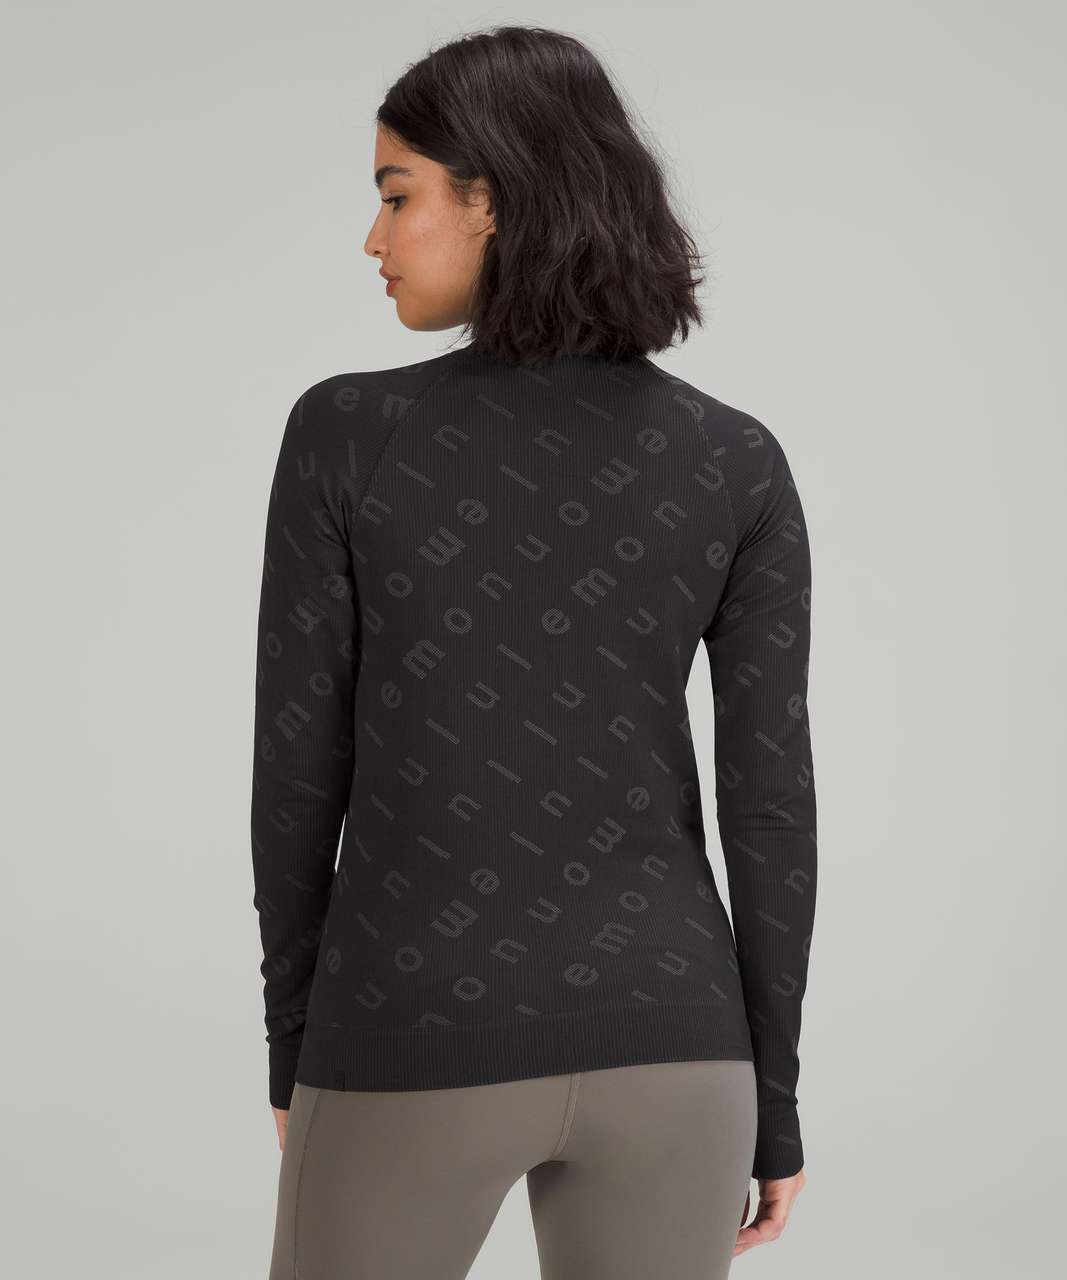 Lululemon Rest Less 1/2 Zip Black Grey Heather Pullover Jacket Running  Small - $42 - From bria